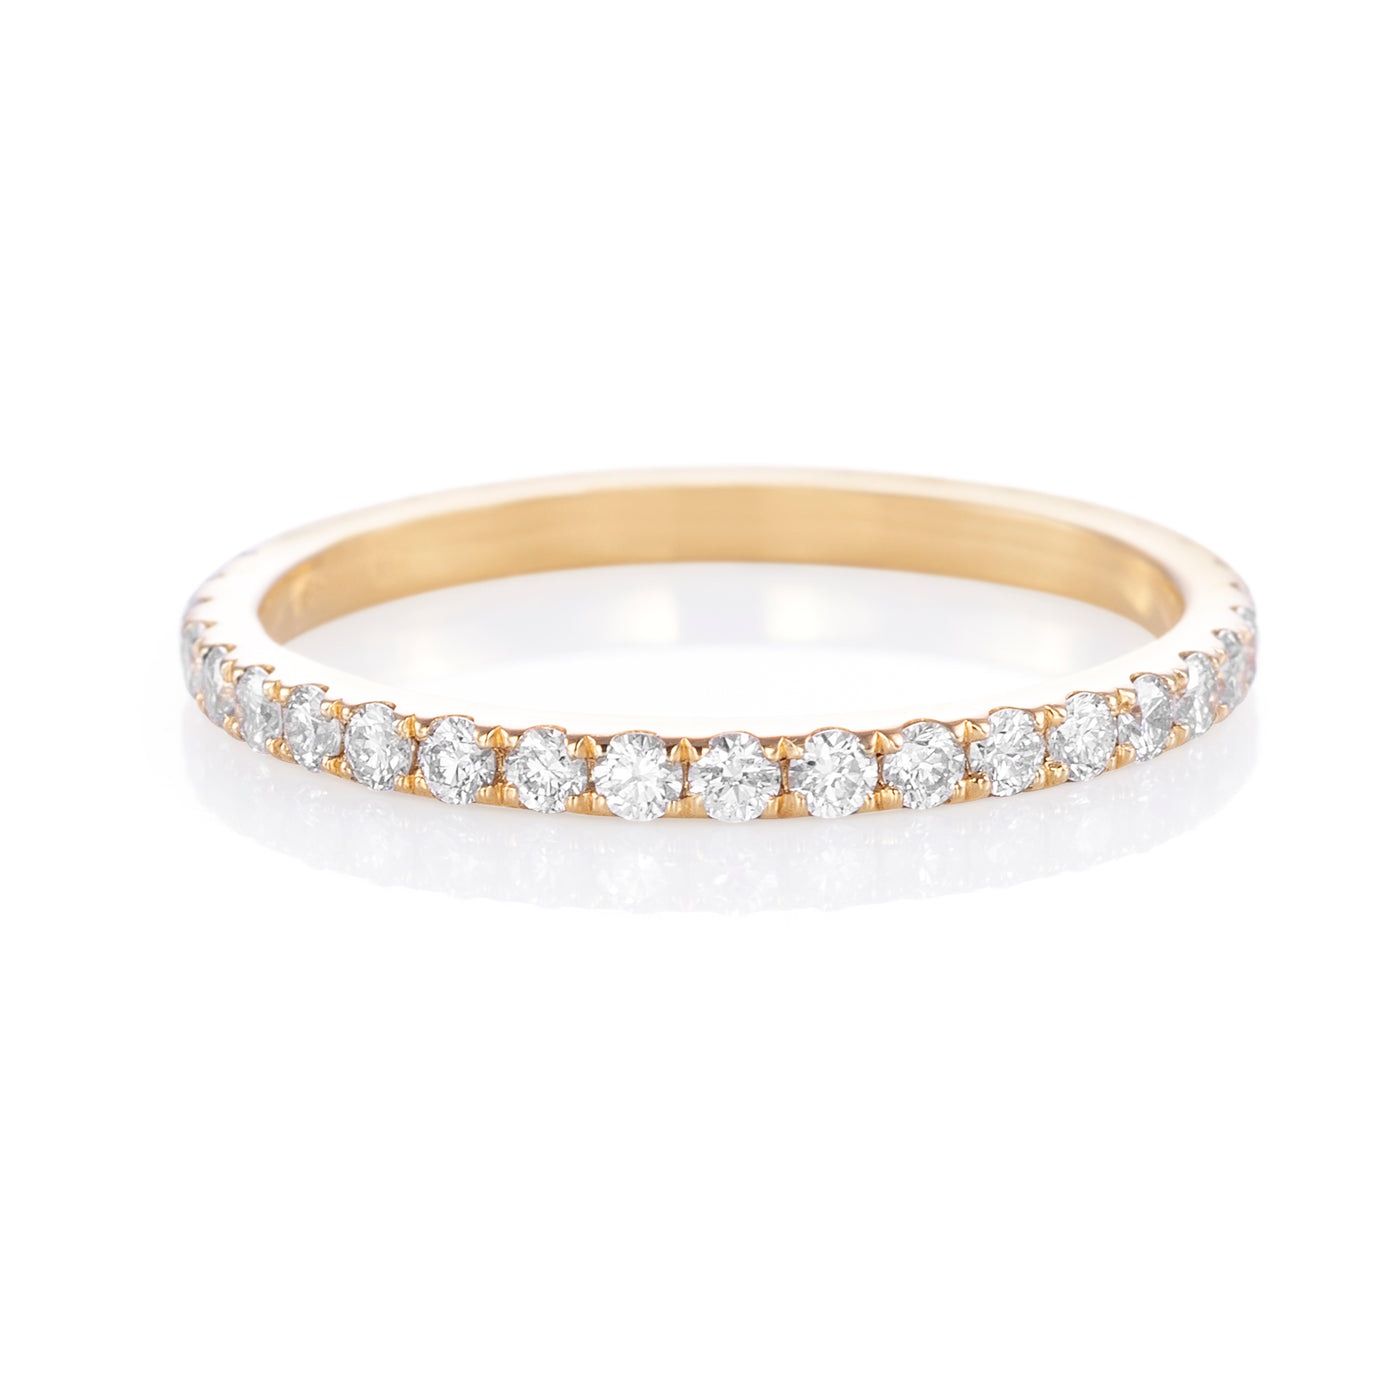 Yellow gold Emilie wedding Band - wide band